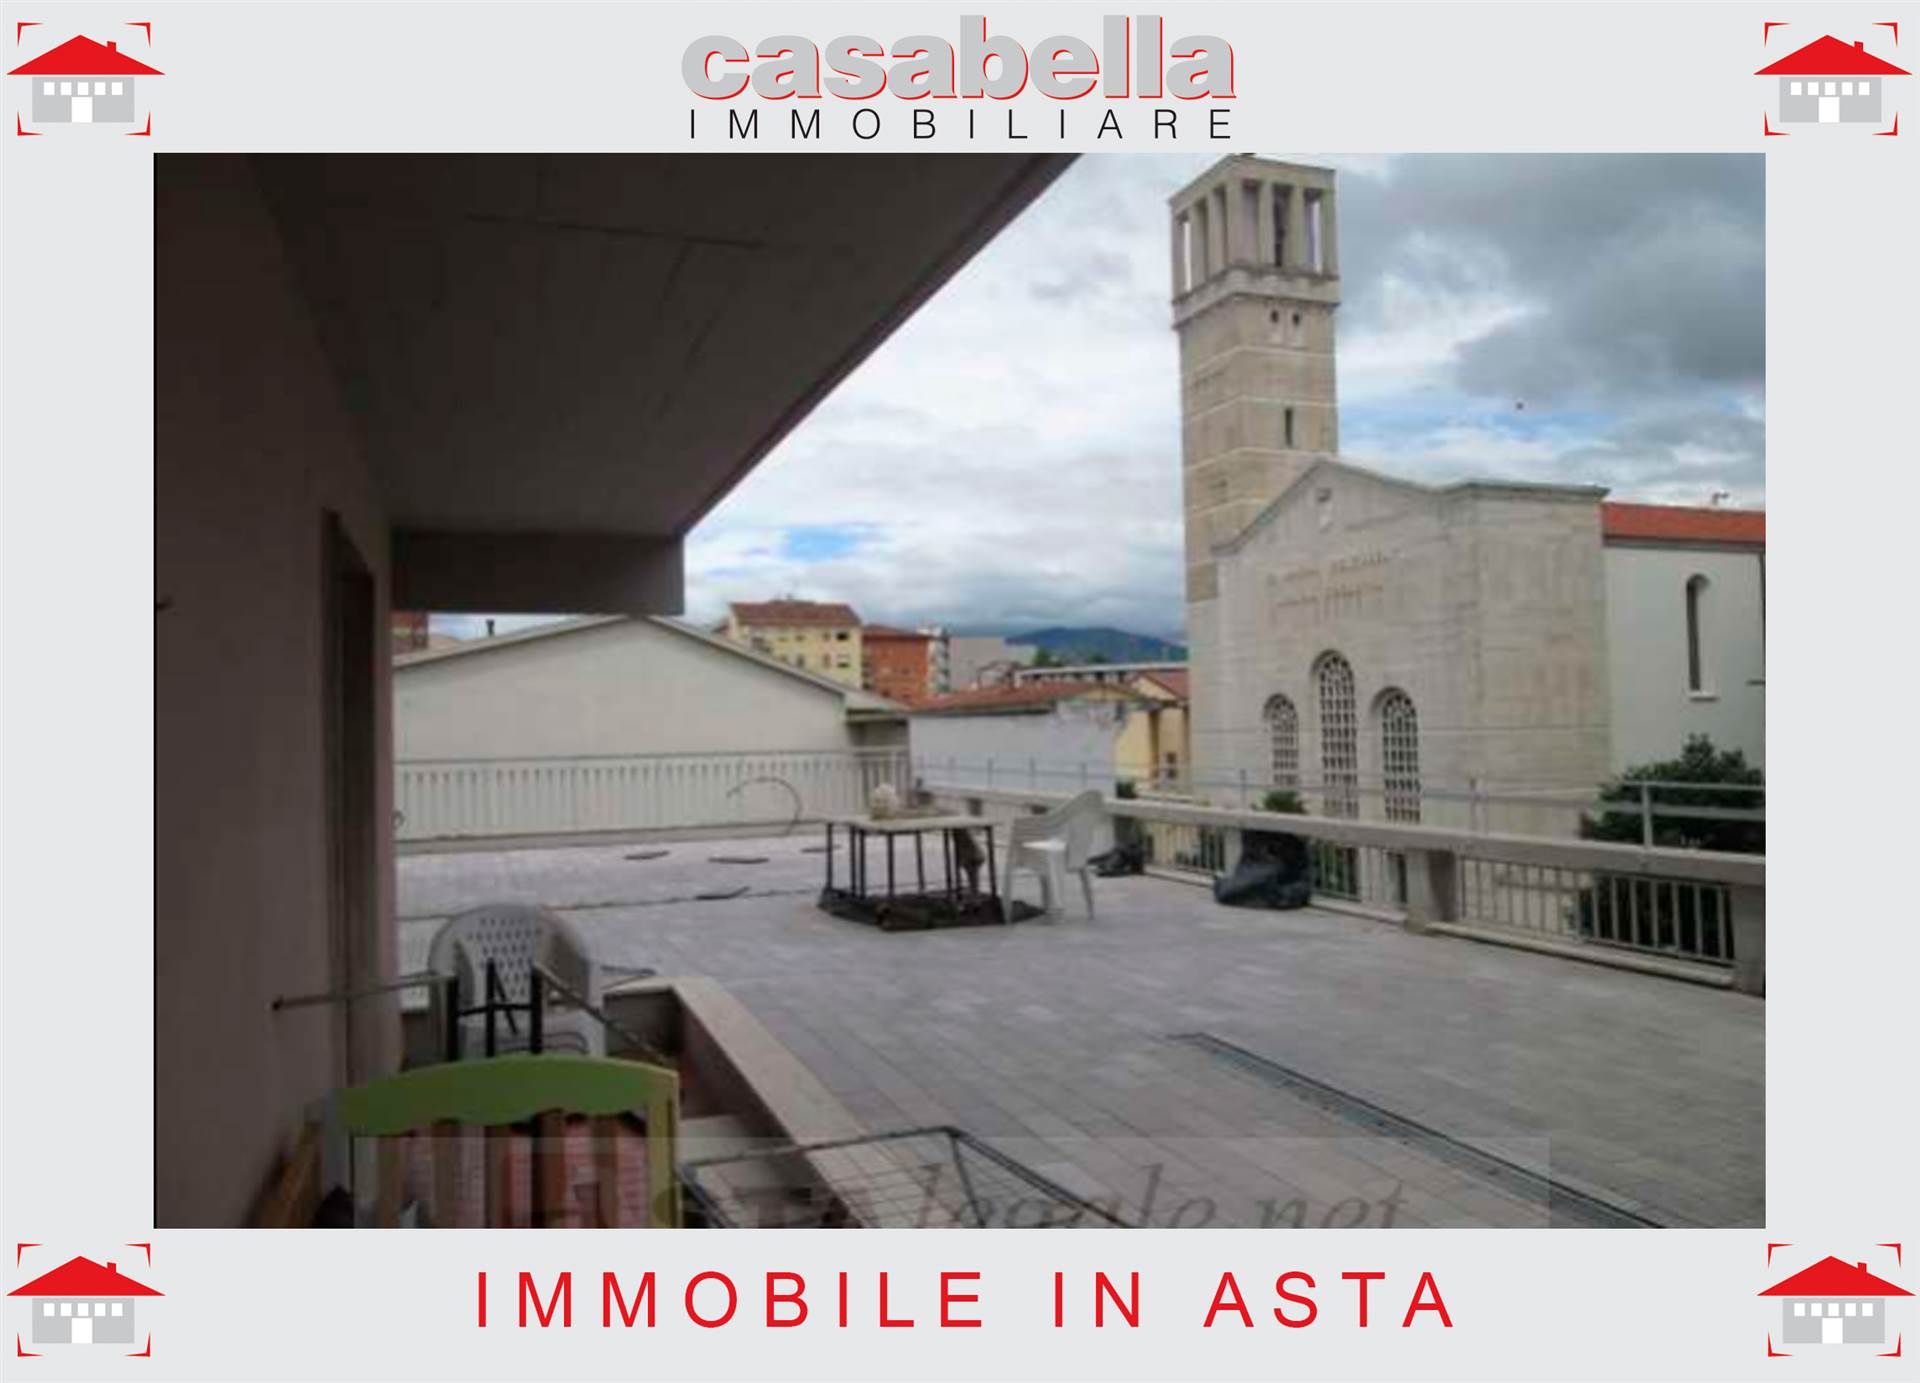 SAN MARCO, PRATO, Apartment for sale of 112 Sq. mt., Heating Centralized, Energetic class: G, placed at 2°, composed by: 5 Rooms, Separate kitchen, , 2 Bedrooms, 1 Bathroom, Double Box, Elevator, 